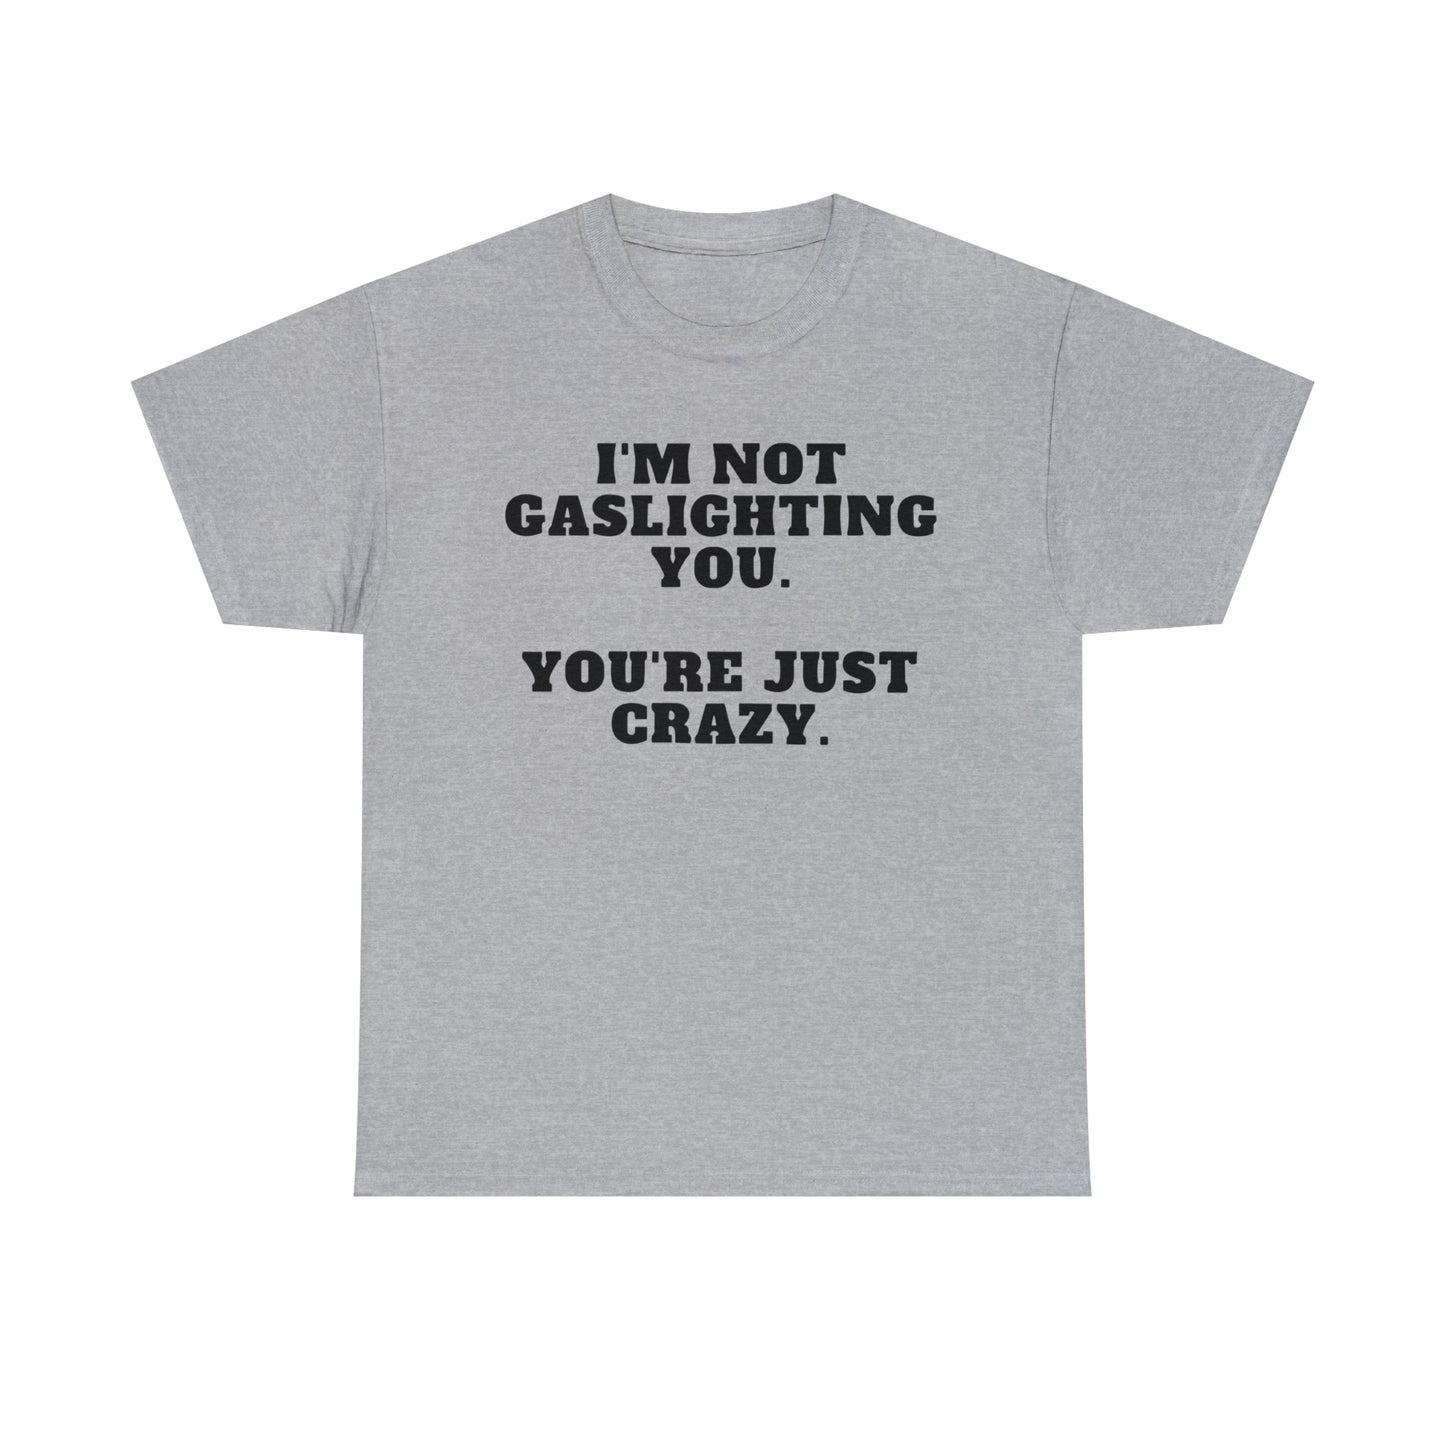 "I'm Not Gaslighting You. You're Just Crazy." Tee